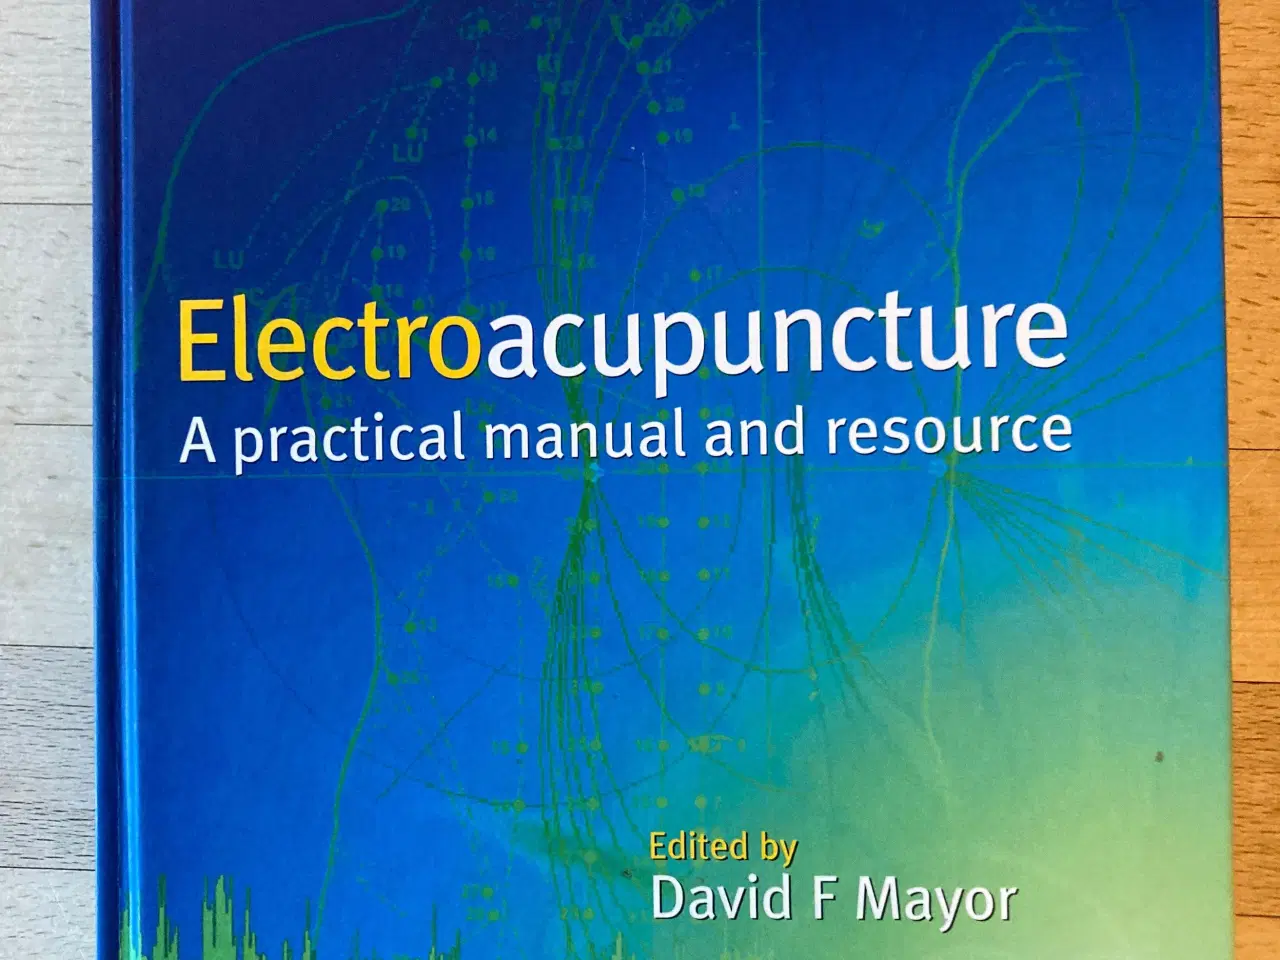 Billede 1 - Electroacupuncture A practical manual and resource